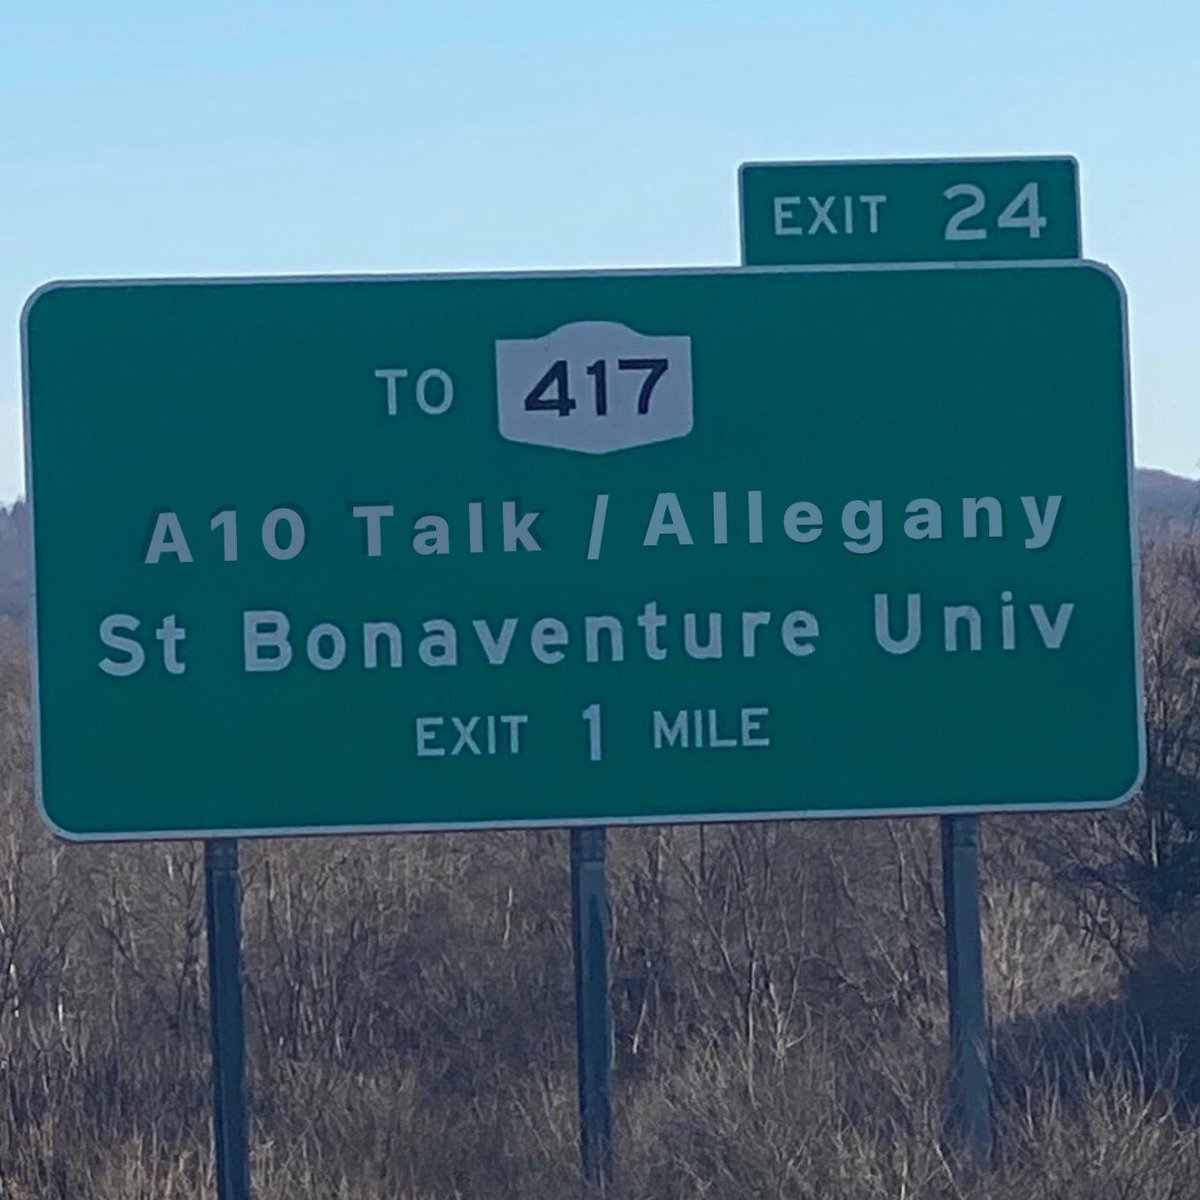 St Bonaventure is NOT in Olean and neither is A10 talk  #LearnAMap #GeographyMatters